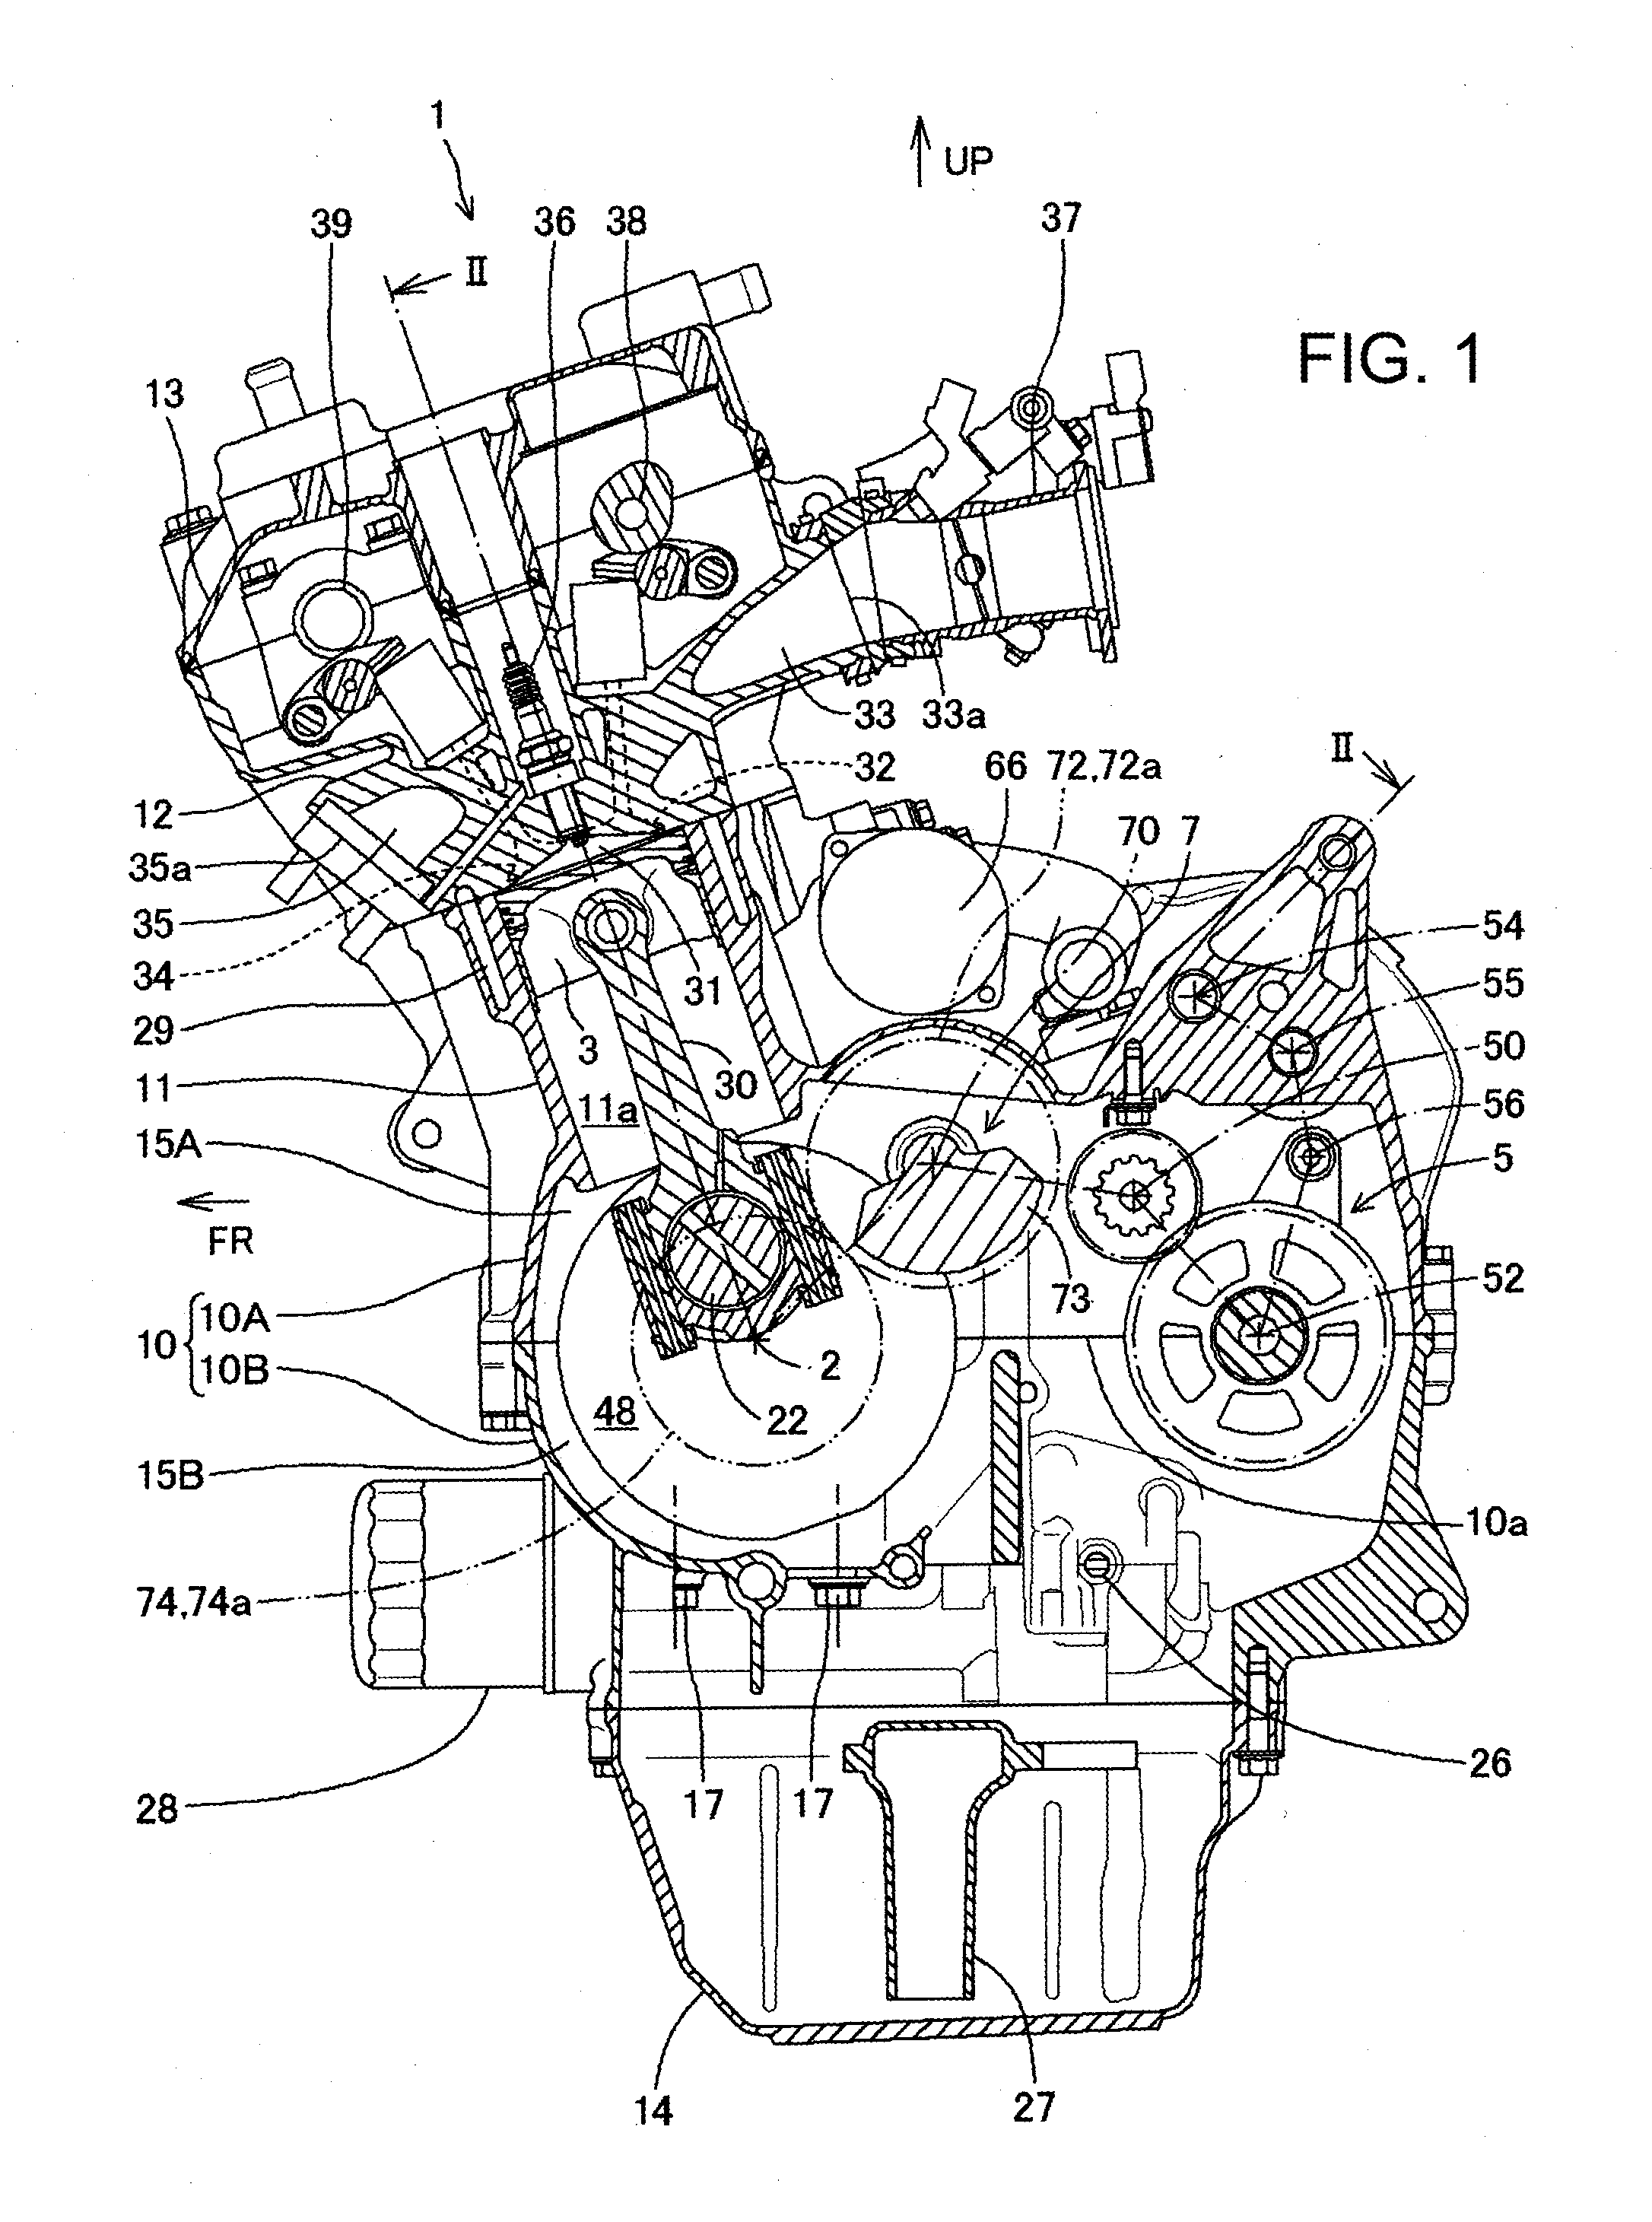 Lubrication structure for bearing section